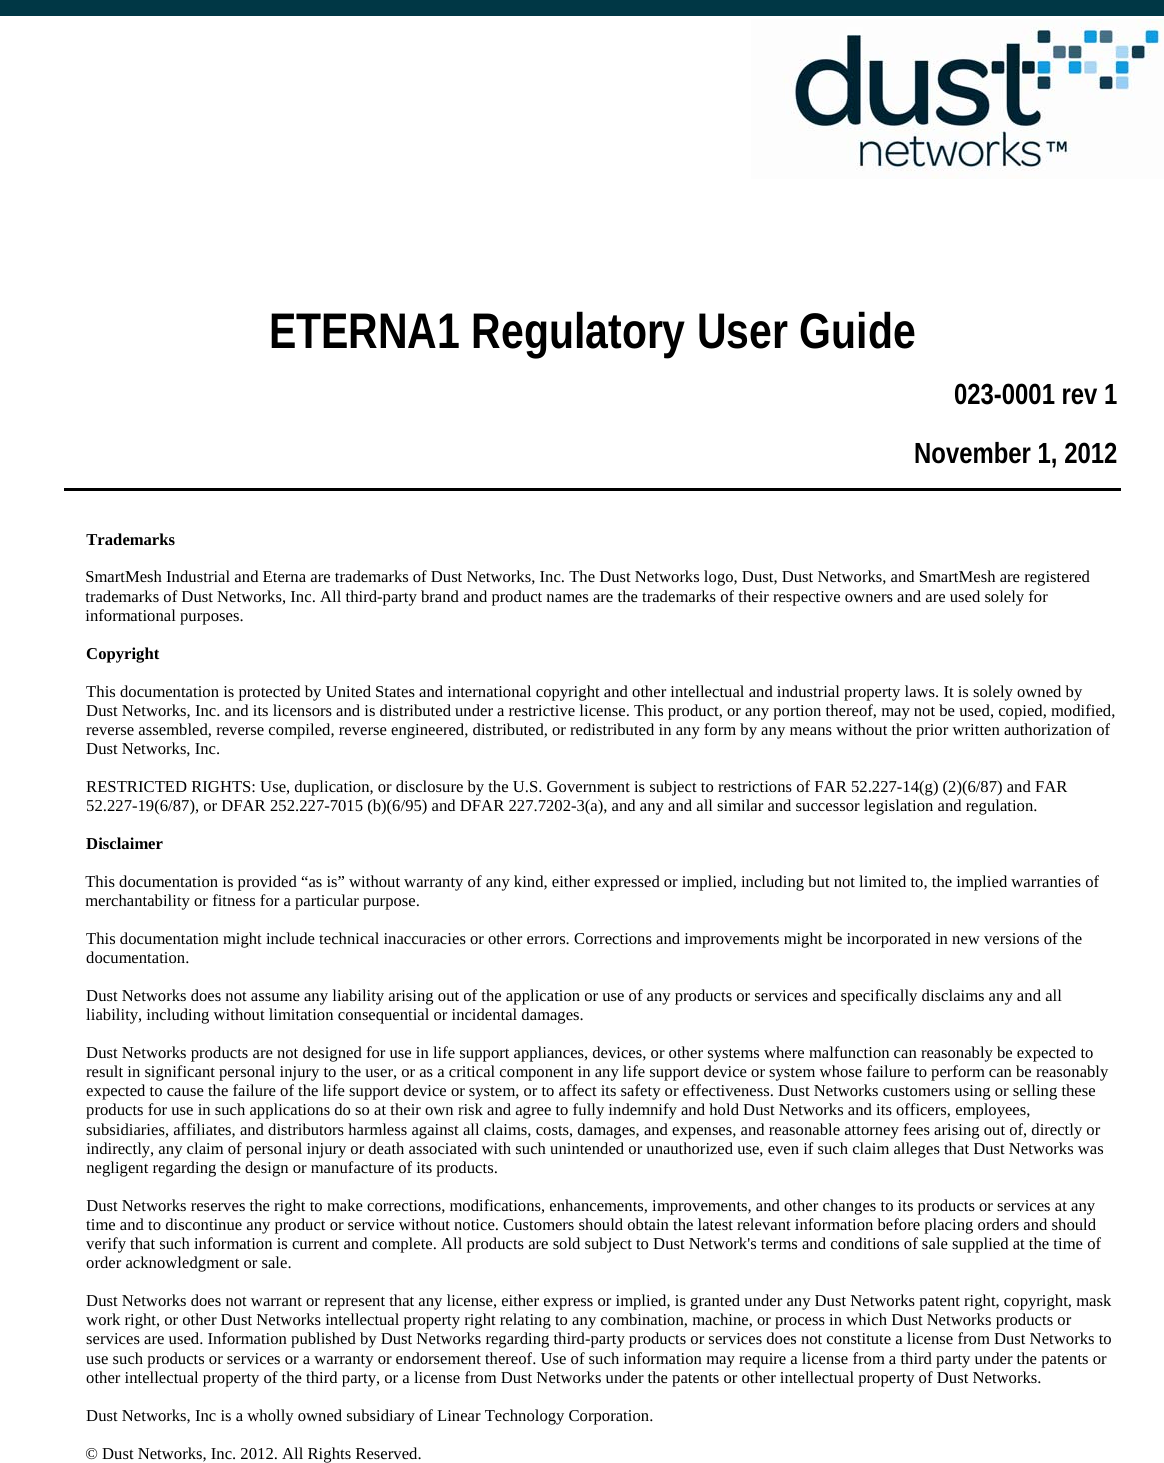        ETERNA1 Regulatory User Guide 023-0001 rev 1 November 1, 2012  Trademarks SmartMesh Industrial and Eterna are trademarks of Dust Networks, Inc. The Dust Networks logo, Dust, Dust Networks, and SmartMesh are registered trademarks of Dust Networks, Inc. All third-party brand and product names are the trademarks of their respective owners and are used solely for informational purposes. Copyright This documentation is protected by United States and international copyright and other intellectual and industrial property laws. It is solely owned by Dust Networks, Inc. and its licensors and is distributed under a restrictive license. This product, or any portion thereof, may not be used, copied, modified, reverse assembled, reverse compiled, reverse engineered, distributed, or redistributed in any form by any means without the prior written authorization of Dust Networks, Inc. RESTRICTED RIGHTS: Use, duplication, or disclosure by the U.S. Government is subject to restrictions of FAR 52.227-14(g) (2)(6/87) and FAR 52.227-19(6/87), or DFAR 252.227-7015 (b)(6/95) and DFAR 227.7202-3(a), and any and all similar and successor legislation and regulation. Disclaimer This documentation is provided “as is” without warranty of any kind, either expressed or implied, including but not limited to, the implied warranties of merchantability or fitness for a particular purpose. This documentation might include technical inaccuracies or other errors. Corrections and improvements might be incorporated in new versions of the documentation. Dust Networks does not assume any liability arising out of the application or use of any products or services and specifically disclaims any and all liability, including without limitation consequential or incidental damages. Dust Networks products are not designed for use in life support appliances, devices, or other systems where malfunction can reasonably be expected to result in significant personal injury to the user, or as a critical component in any life support device or system whose failure to perform can be reasonably expected to cause the failure of the life support device or system, or to affect its safety or effectiveness. Dust Networks customers using or selling these products for use in such applications do so at their own risk and agree to fully indemnify and hold Dust Networks and its officers, employees, subsidiaries, affiliates, and distributors harmless against all claims, costs, damages, and expenses, and reasonable attorney fees arising out of, directly or indirectly, any claim of personal injury or death associated with such unintended or unauthorized use, even if such claim alleges that Dust Networks was negligent regarding the design or manufacture of its products. Dust Networks reserves the right to make corrections, modifications, enhancements, improvements, and other changes to its products or services at any time and to discontinue any product or service without notice. Customers should obtain the latest relevant information before placing orders and should verify that such information is current and complete. All products are sold subject to Dust Network&apos;s terms and conditions of sale supplied at the time of order acknowledgment or sale. Dust Networks does not warrant or represent that any license, either express or implied, is granted under any Dust Networks patent right, copyright, mask work right, or other Dust Networks intellectual property right relating to any combination, machine, or process in which Dust Networks products or services are used. Information published by Dust Networks regarding third-party products or services does not constitute a license from Dust Networks to use such products or services or a warranty or endorsement thereof. Use of such information may require a license from a third party under the patents or other intellectual property of the third party, or a license from Dust Networks under the patents or other intellectual property of Dust Networks.  Dust Networks, Inc is a wholly owned subsidiary of Linear Technology Corporation. © Dust Networks, Inc. 2012. All Rights Reserved.   